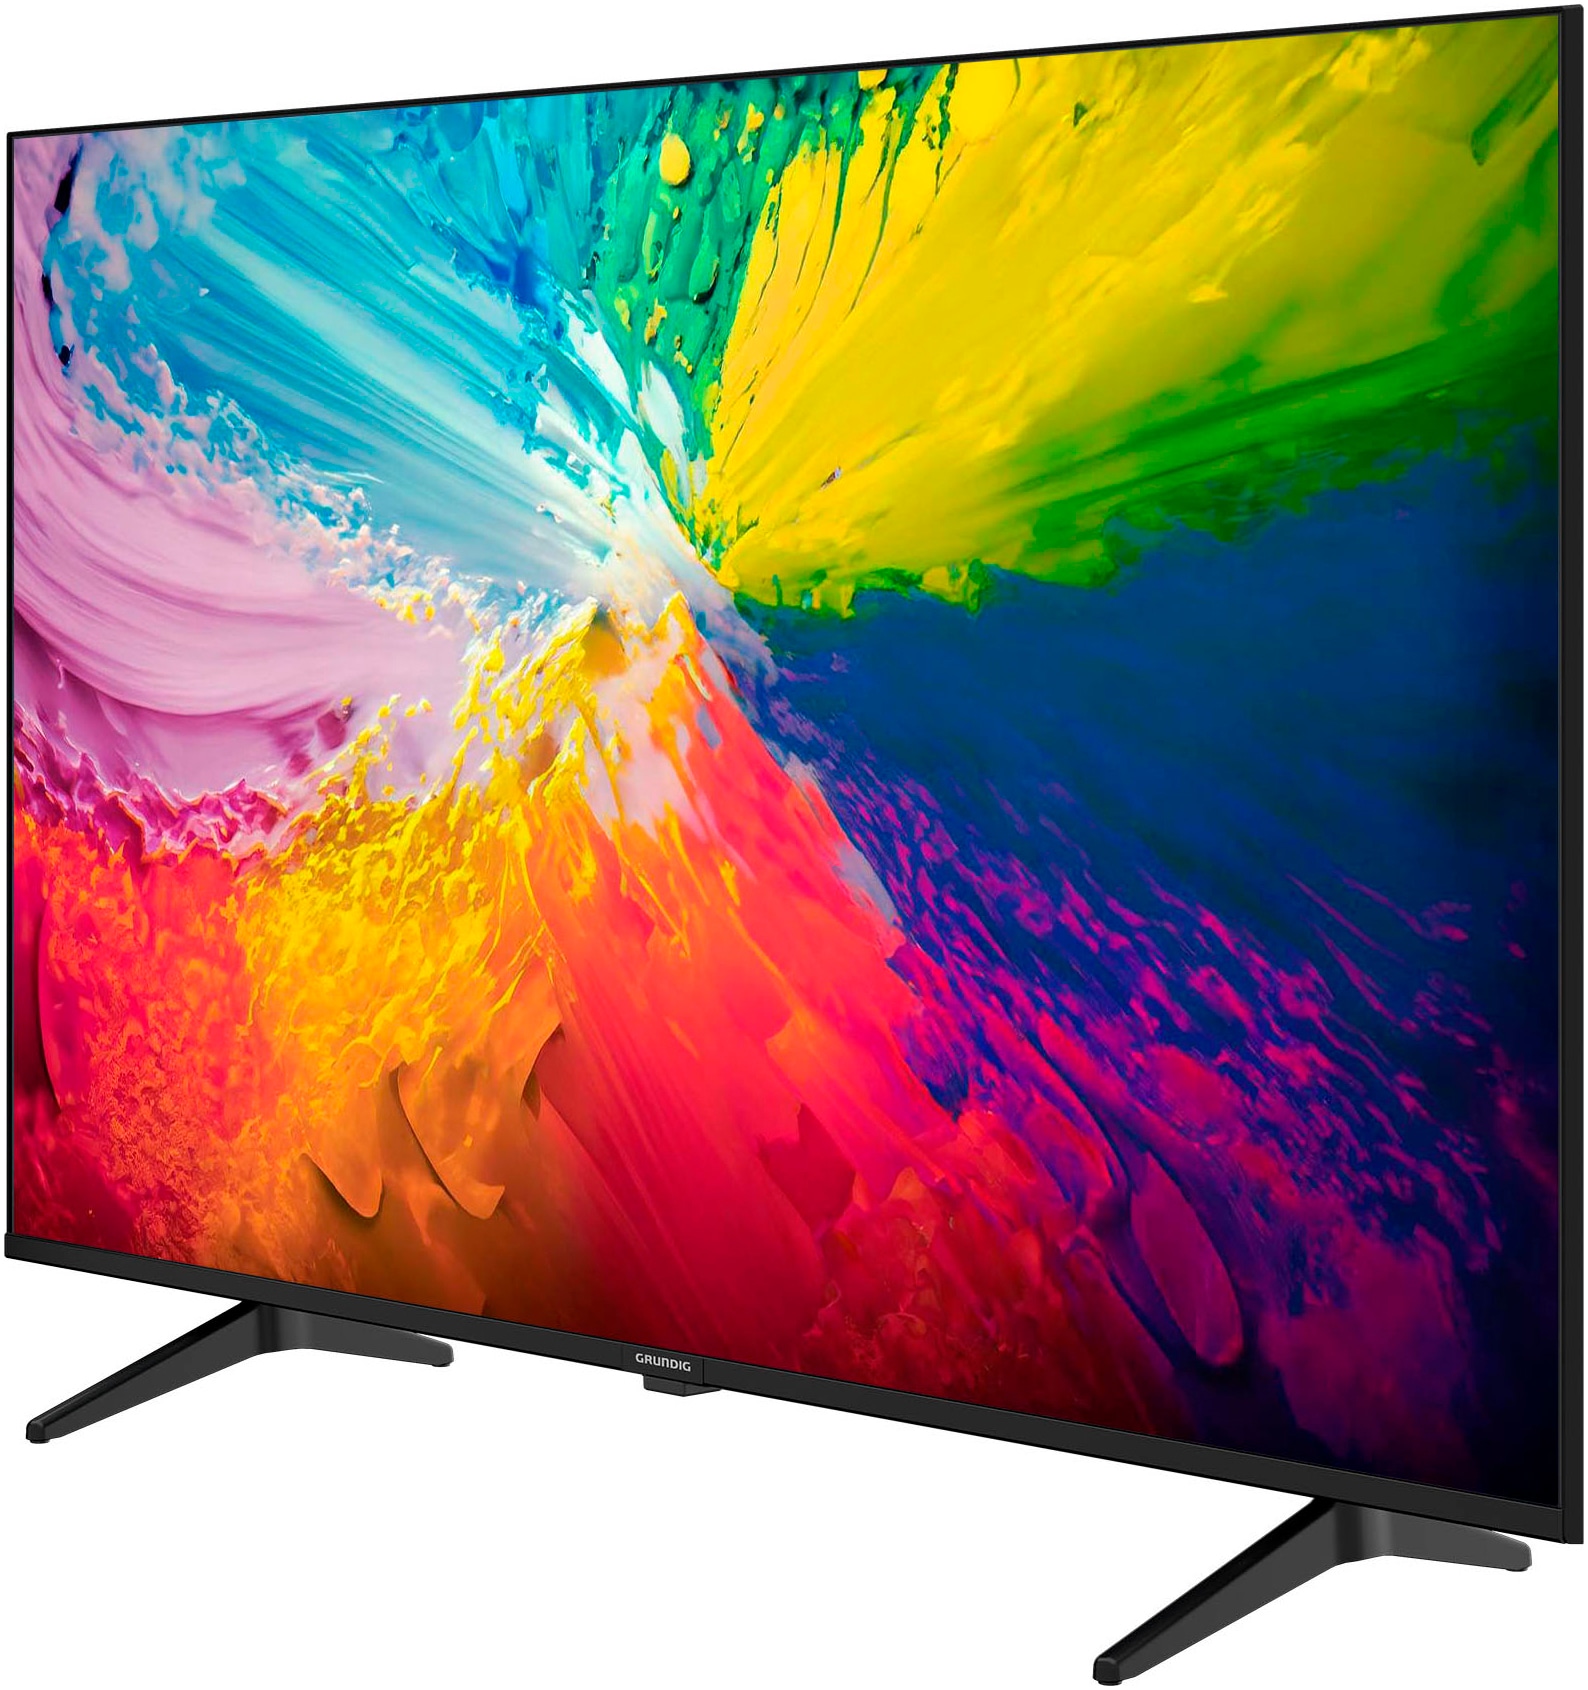 Grundig LED-Fernseher »43 VOE 73 AU5T00«, 108 cm/43 Zoll, 4K Ultra HD, Android TV